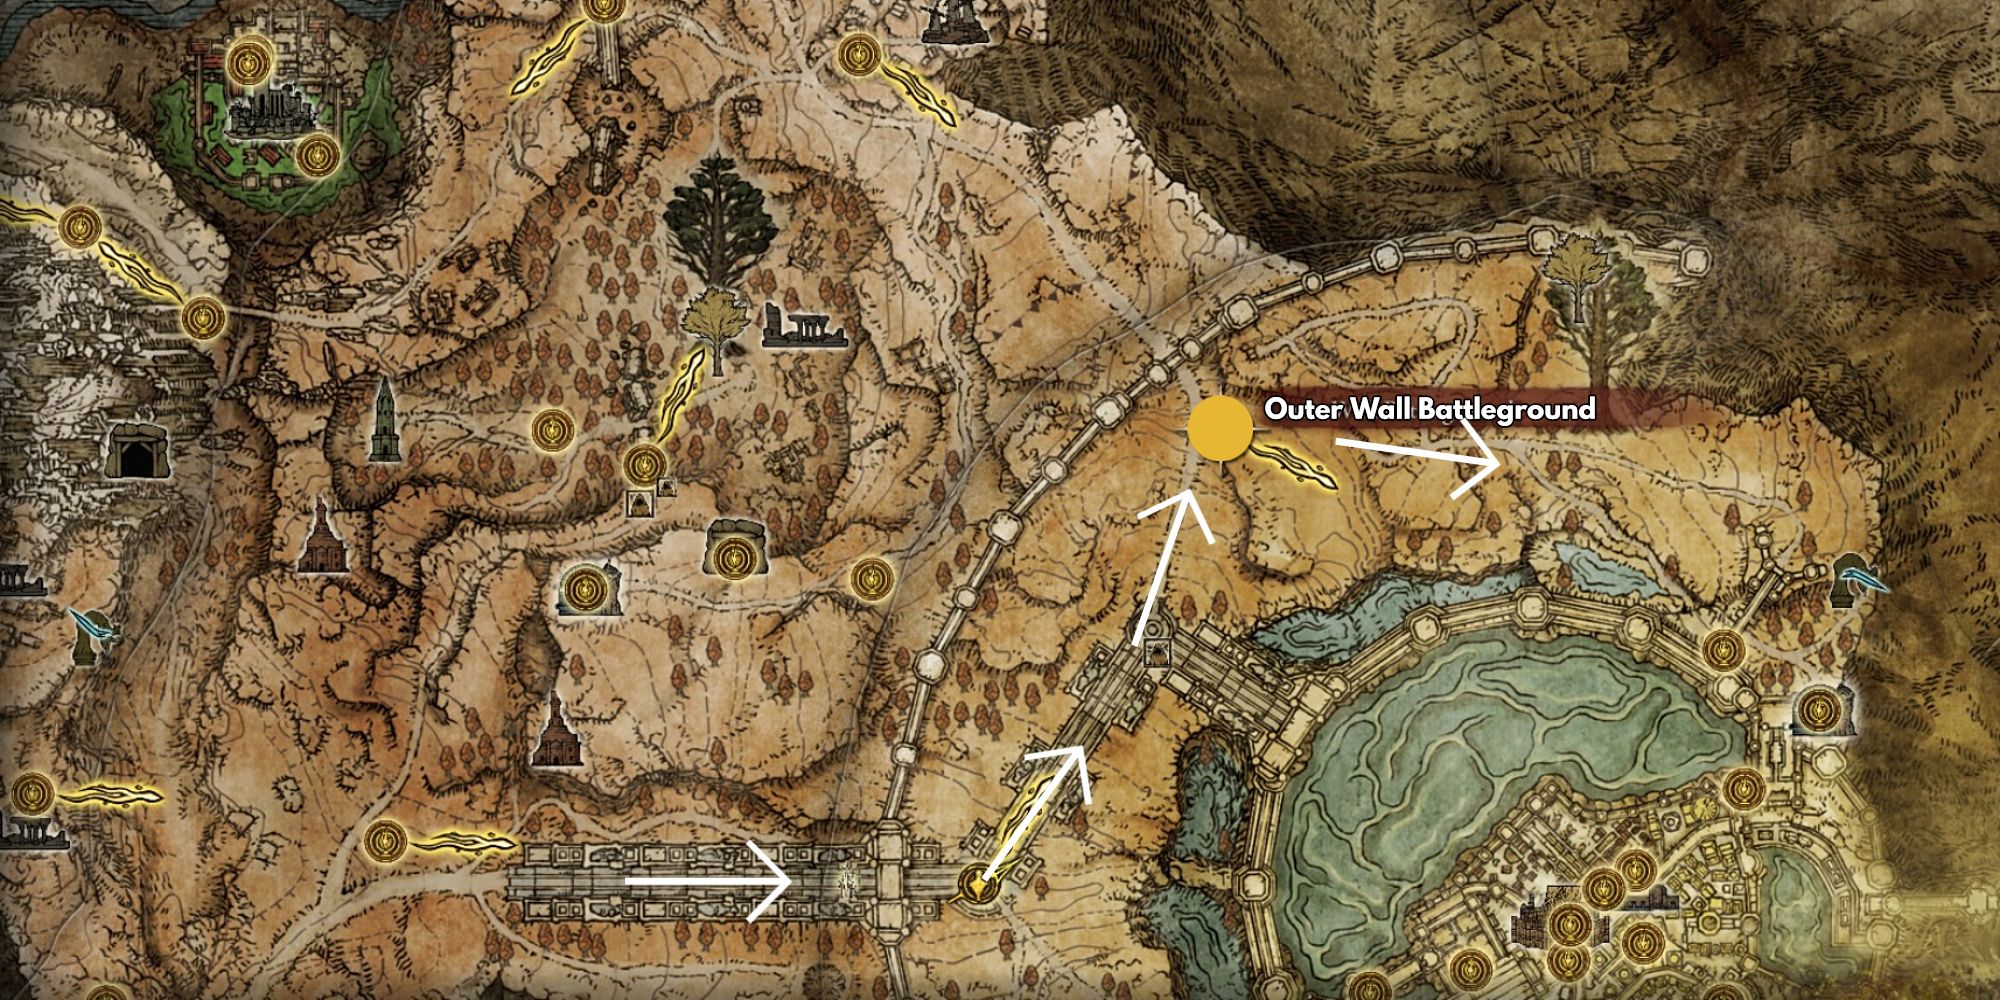 Elden Ring atlus plateau map to get to the city